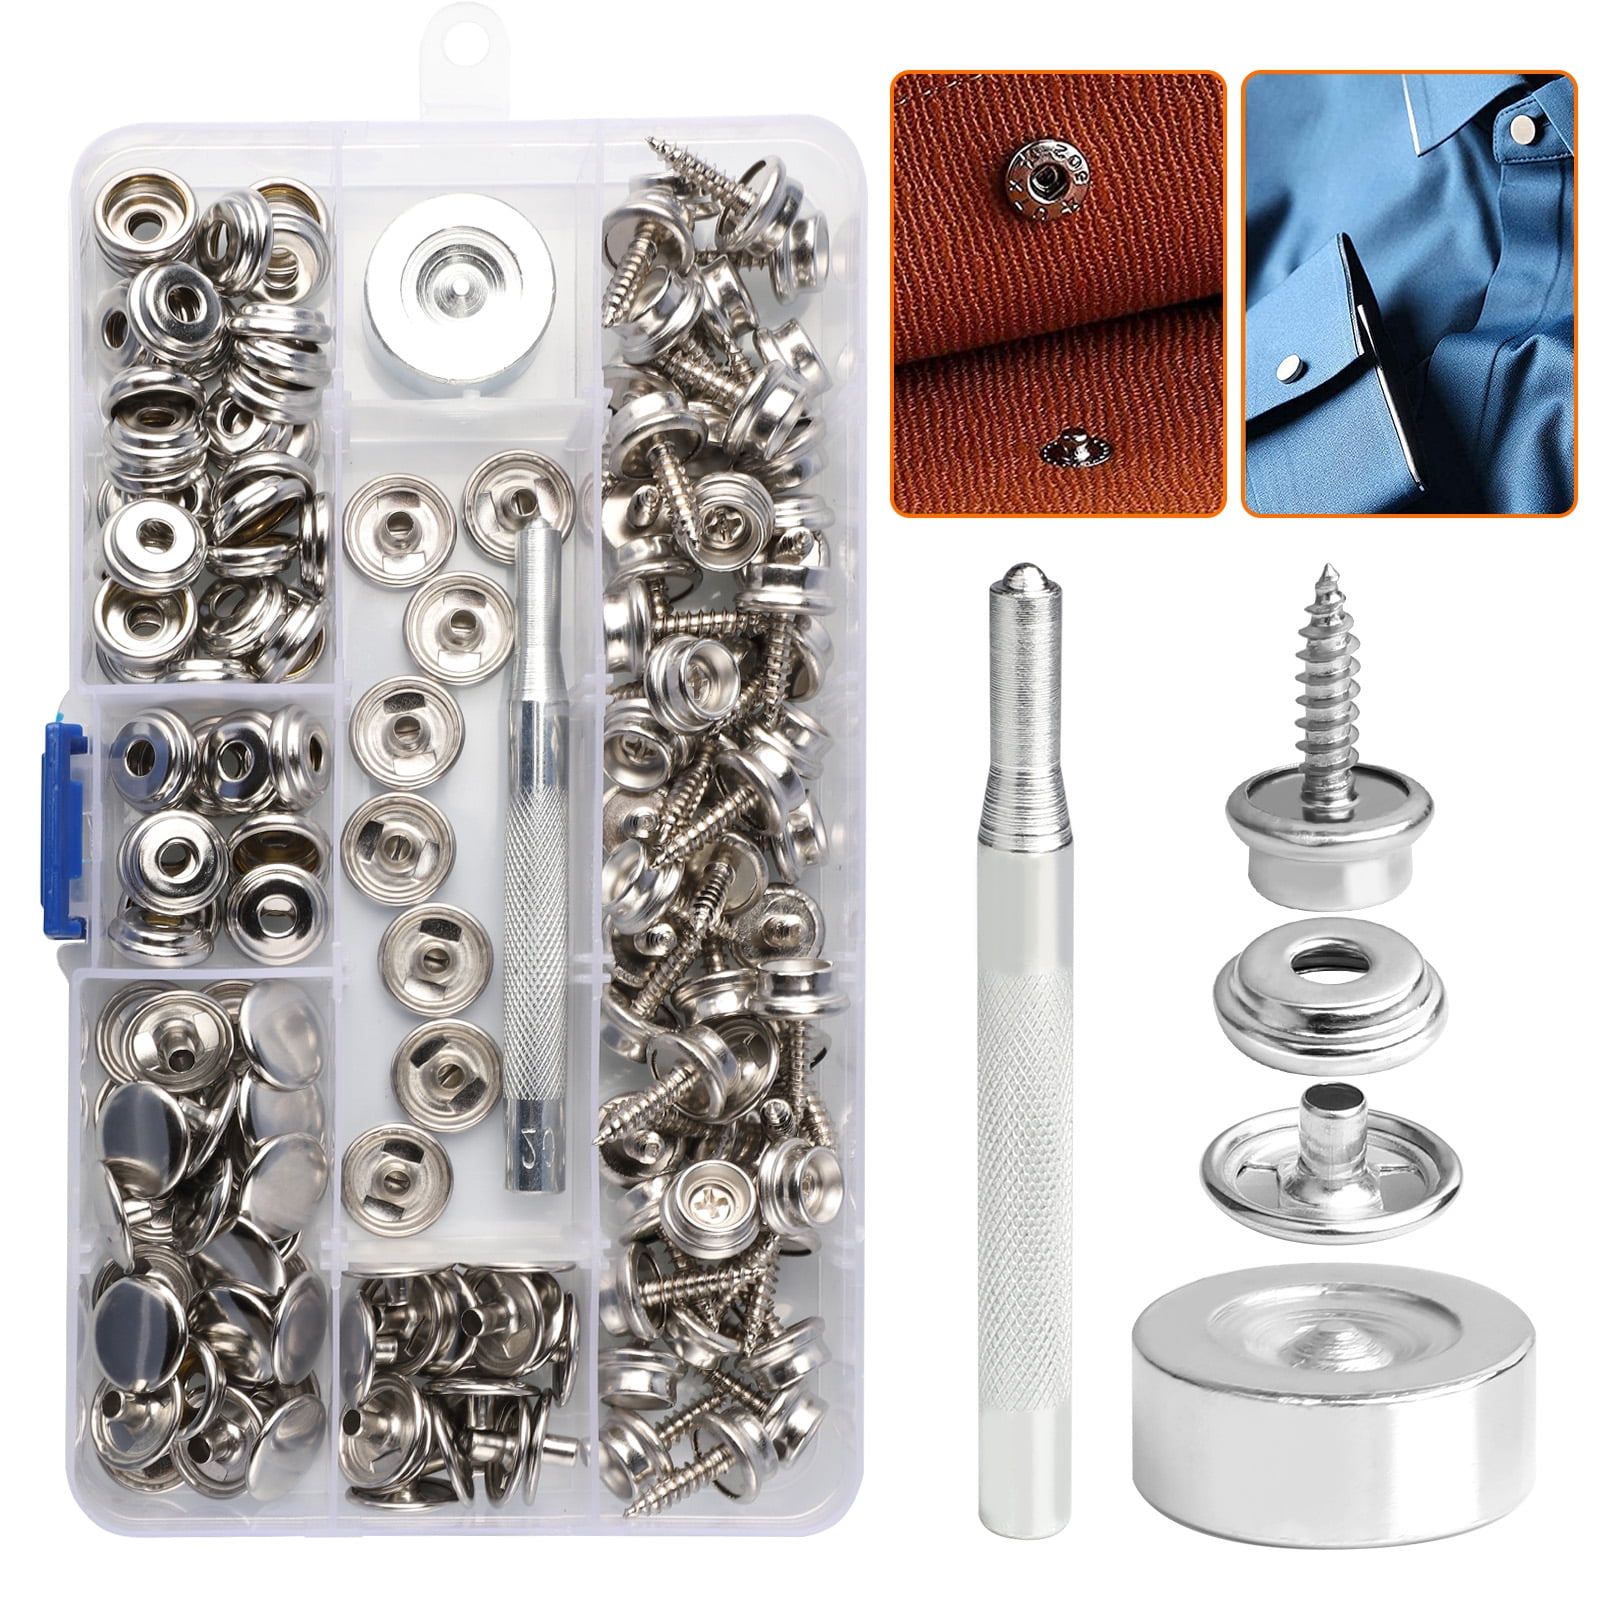 60 Set Leather Snap Fasteners Kit,15mm Metal Button Snaps Press Studs with  4 Setter Tools, 2 Color Leather Snaps for Clothes, Jackets, Jeans Wears